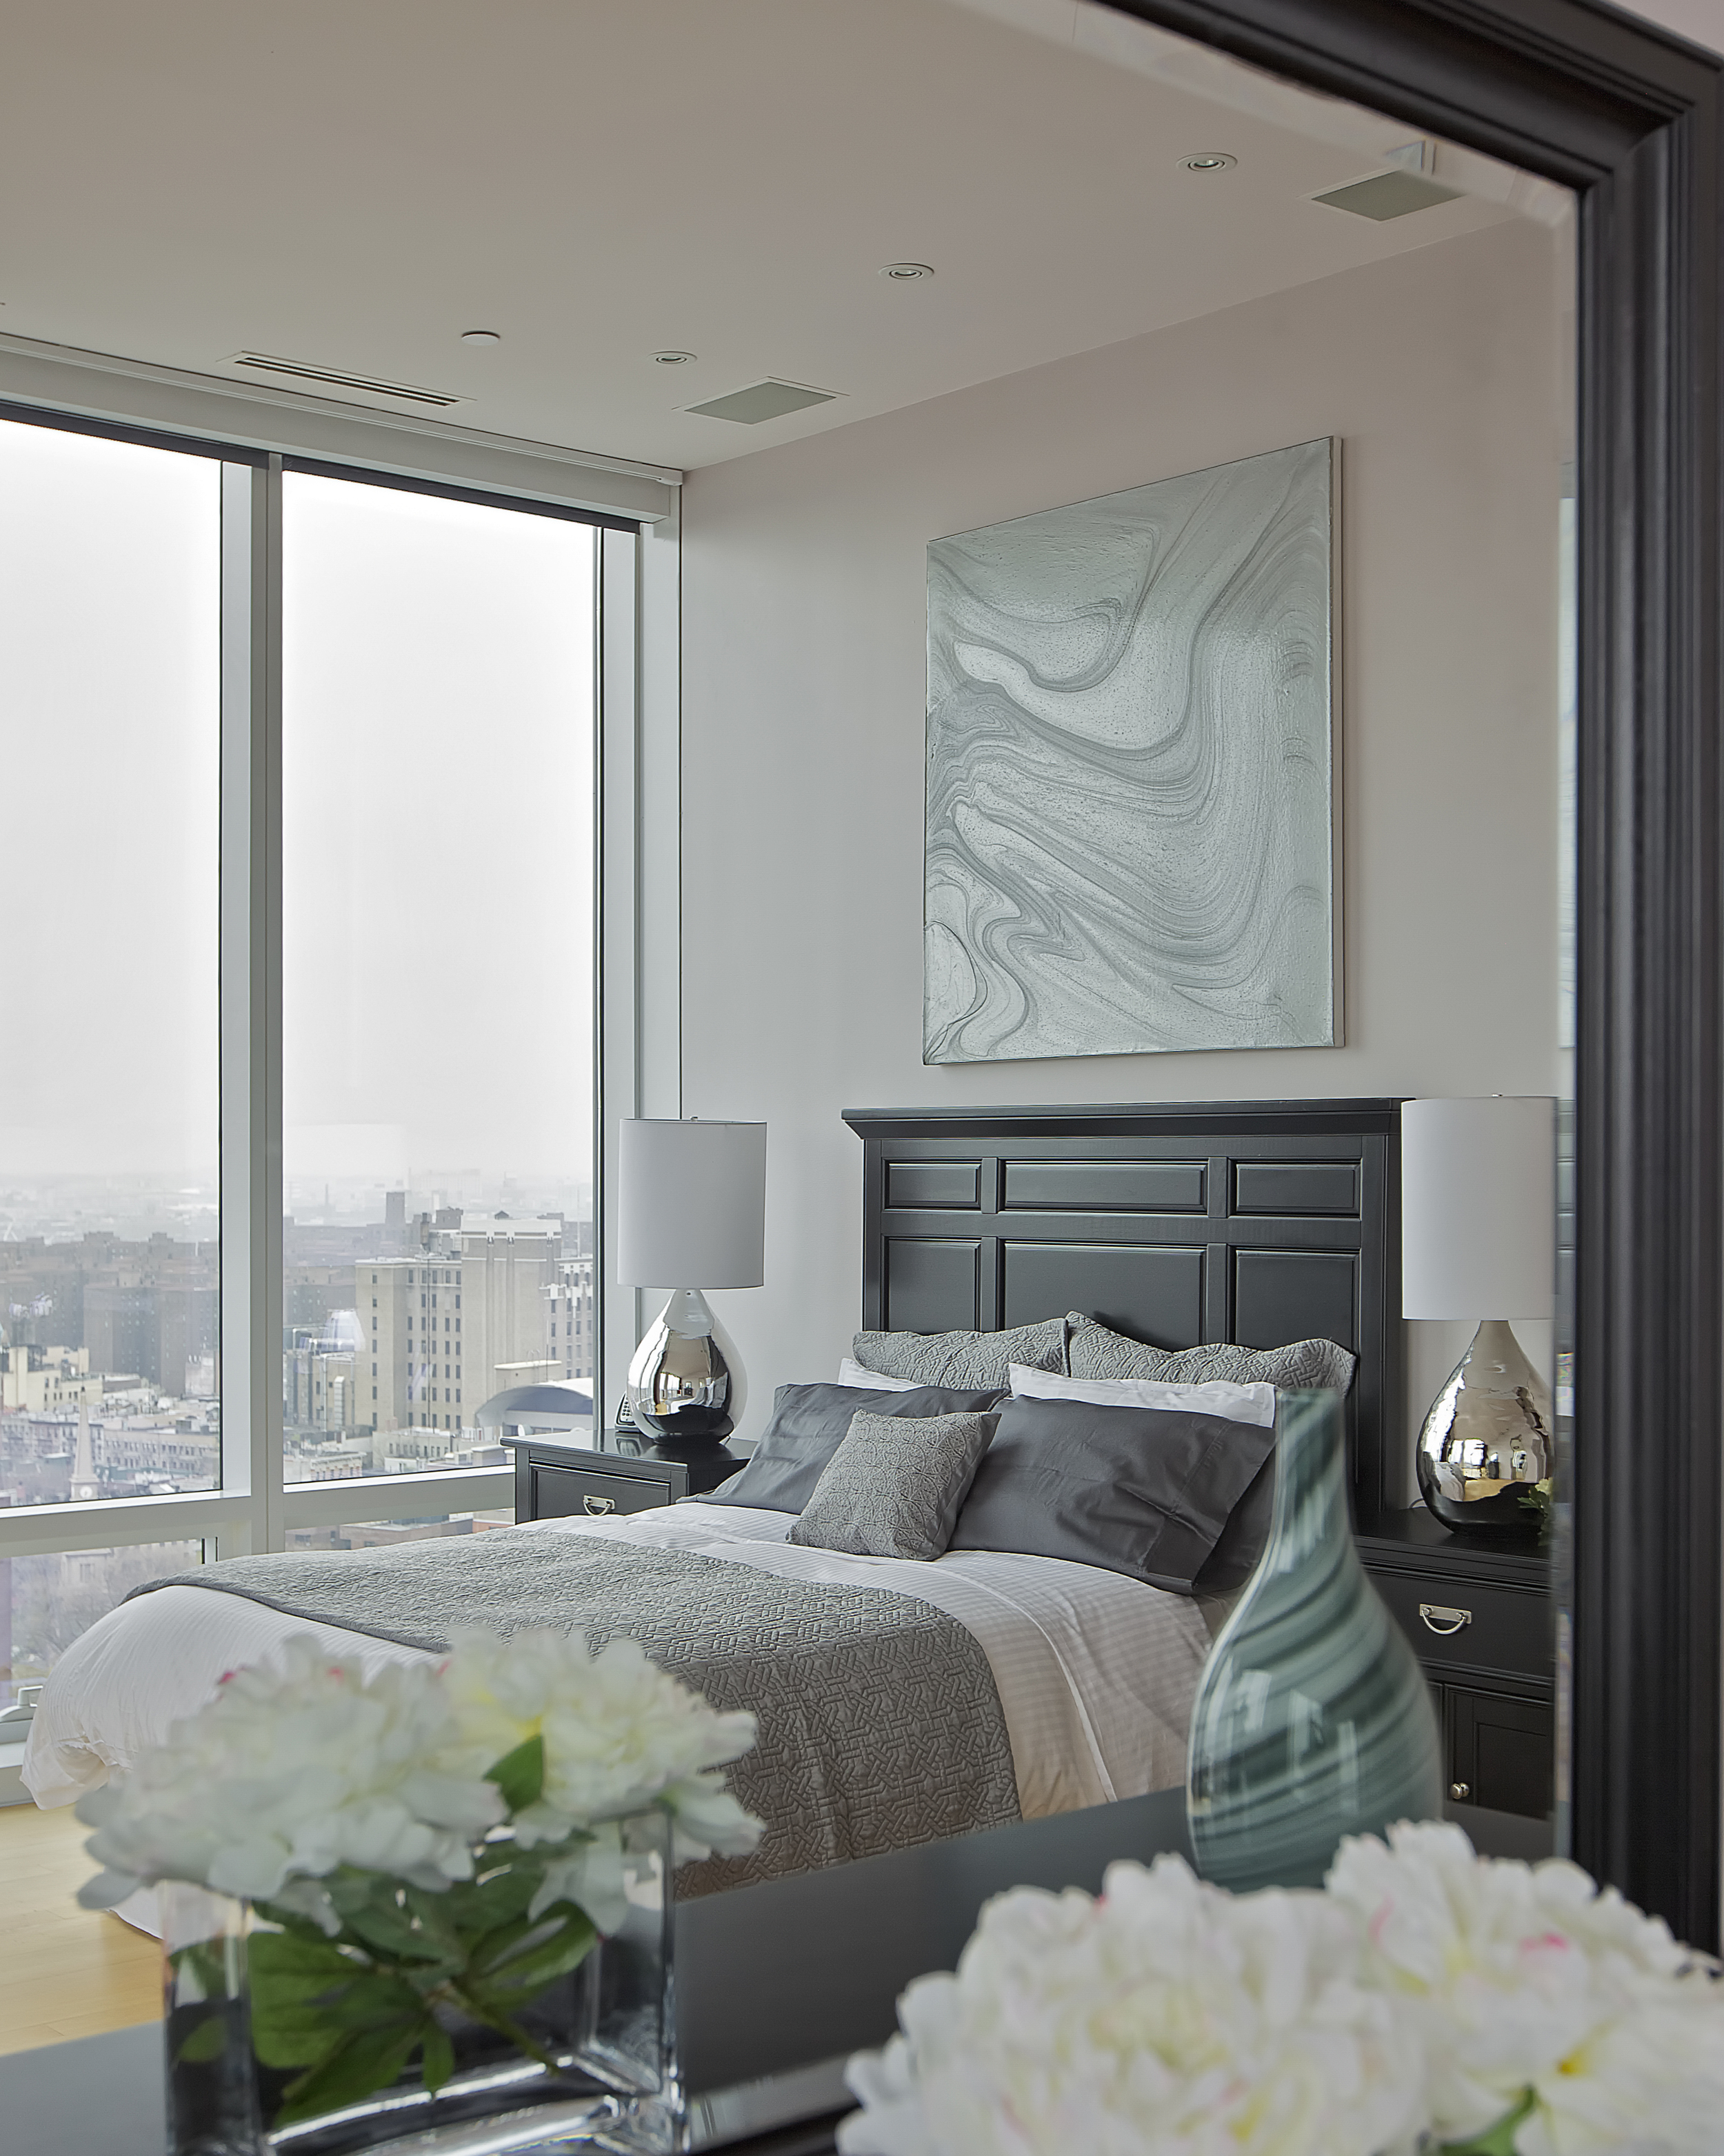   CHELSEA PENTHOUSE DUPLEX   A classic color scheme brings an elegant and luxurious feel to the bedroom. A gray and white space infused with dark brown wooden work decorates the space. The vase and lamps add a modern touch to the room. Wake up to the